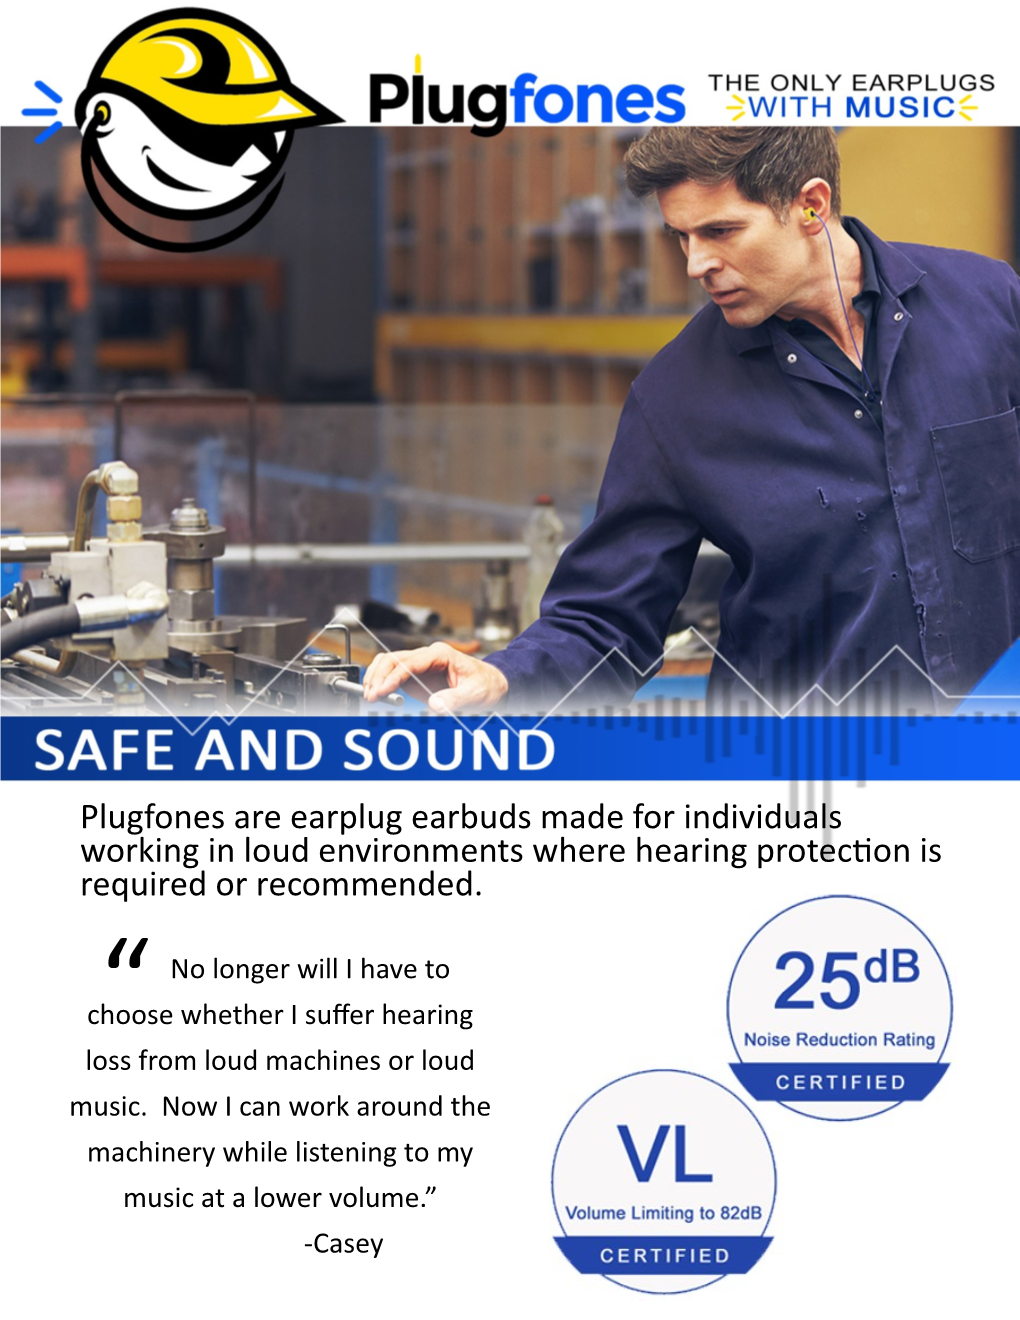 Plugfones Are Earplug Earbuds Made for Individuals Working in Loud Environments Where Hearing Protection Is Required Or Recommended